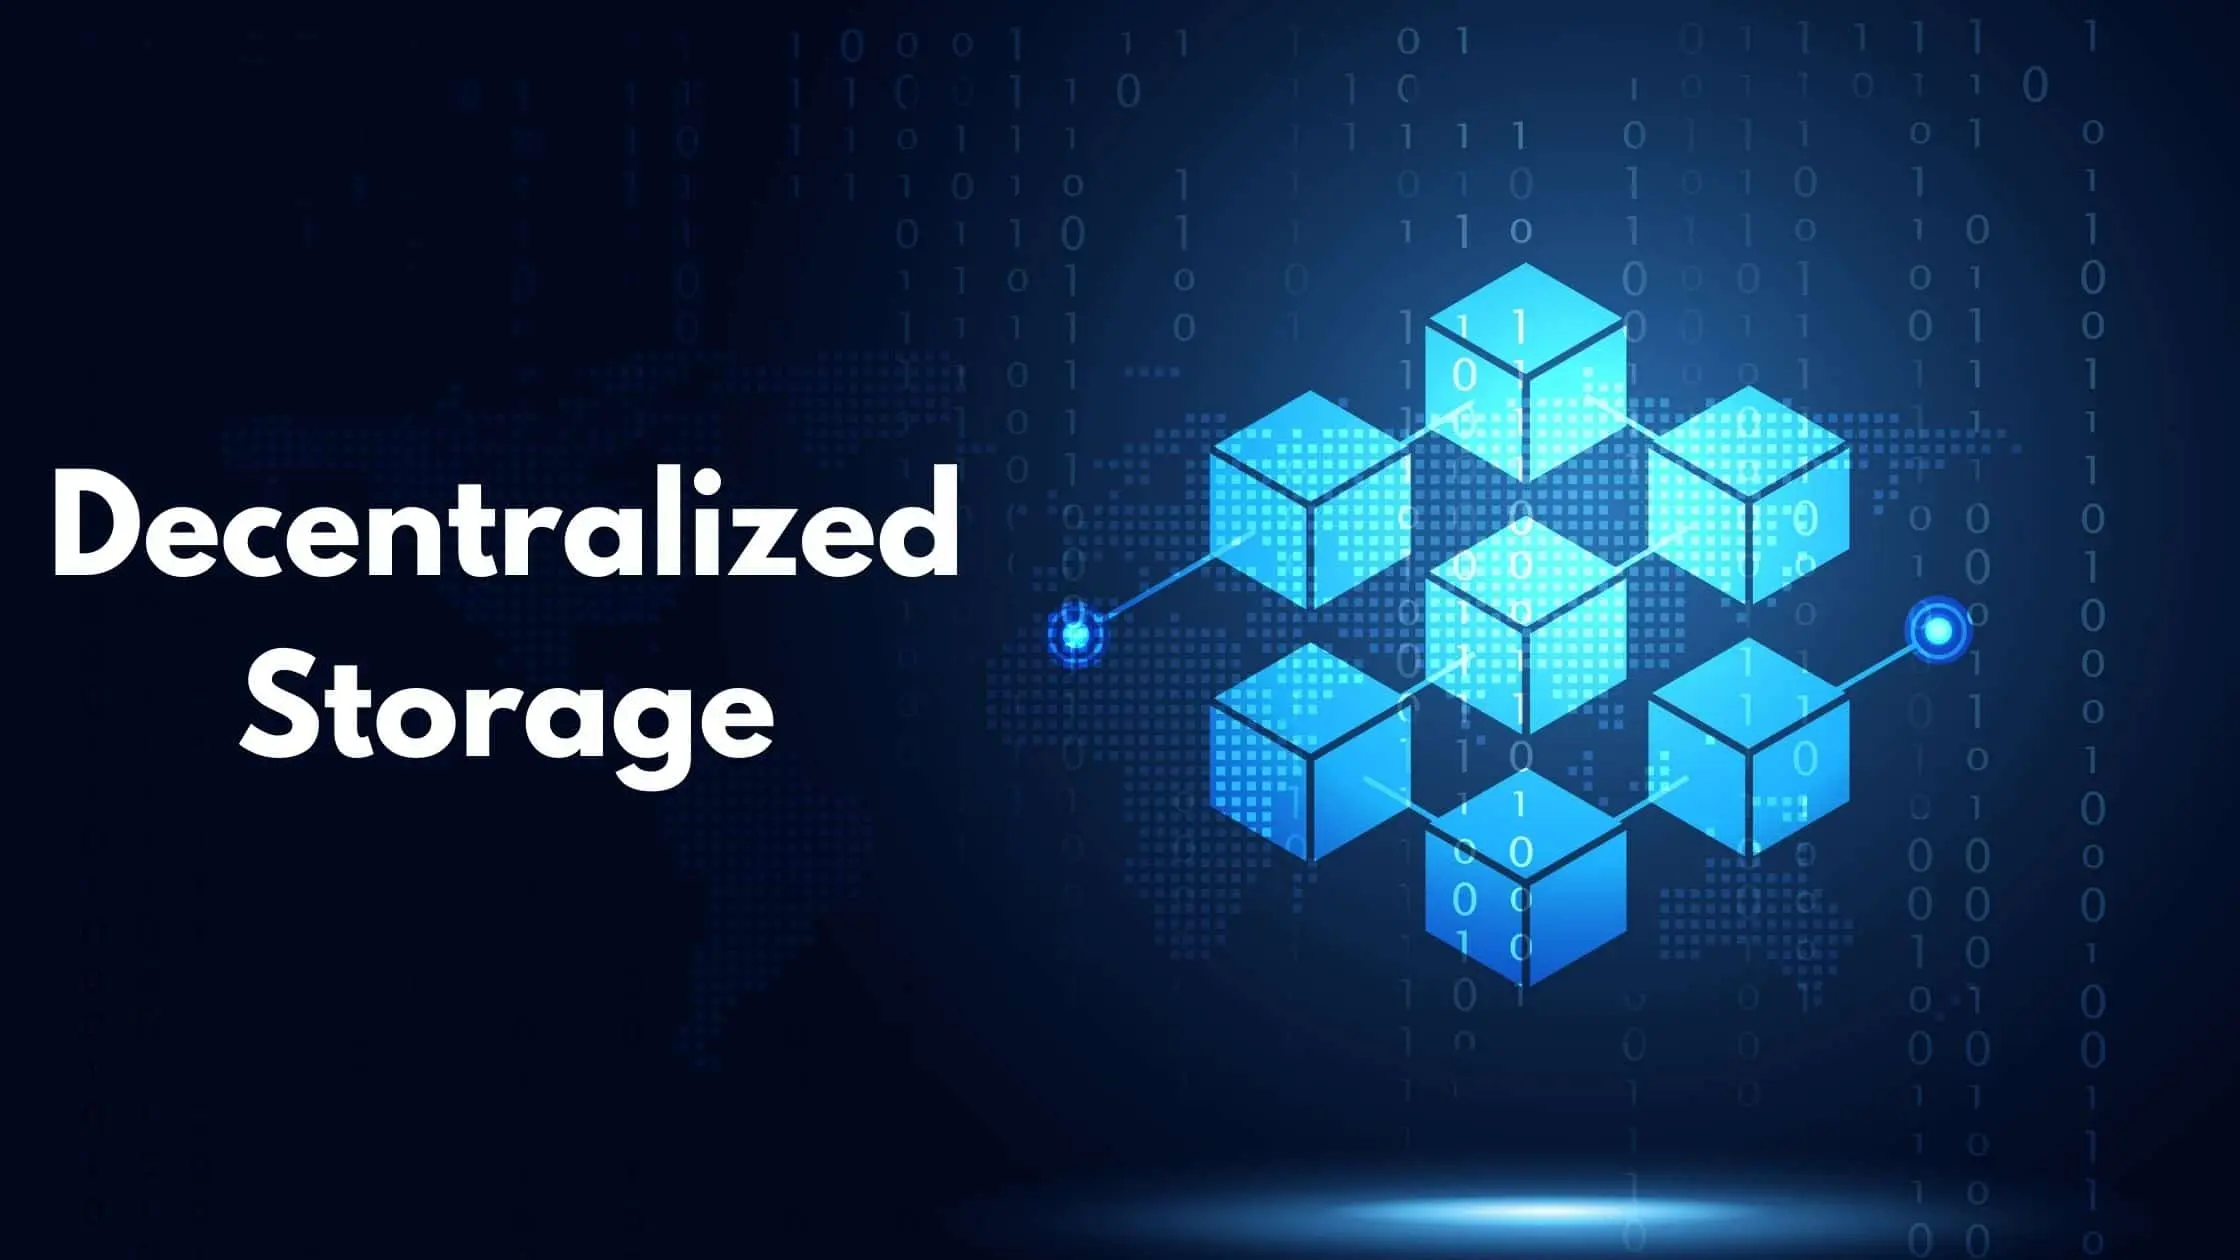 What Is a Decentralized Storage?